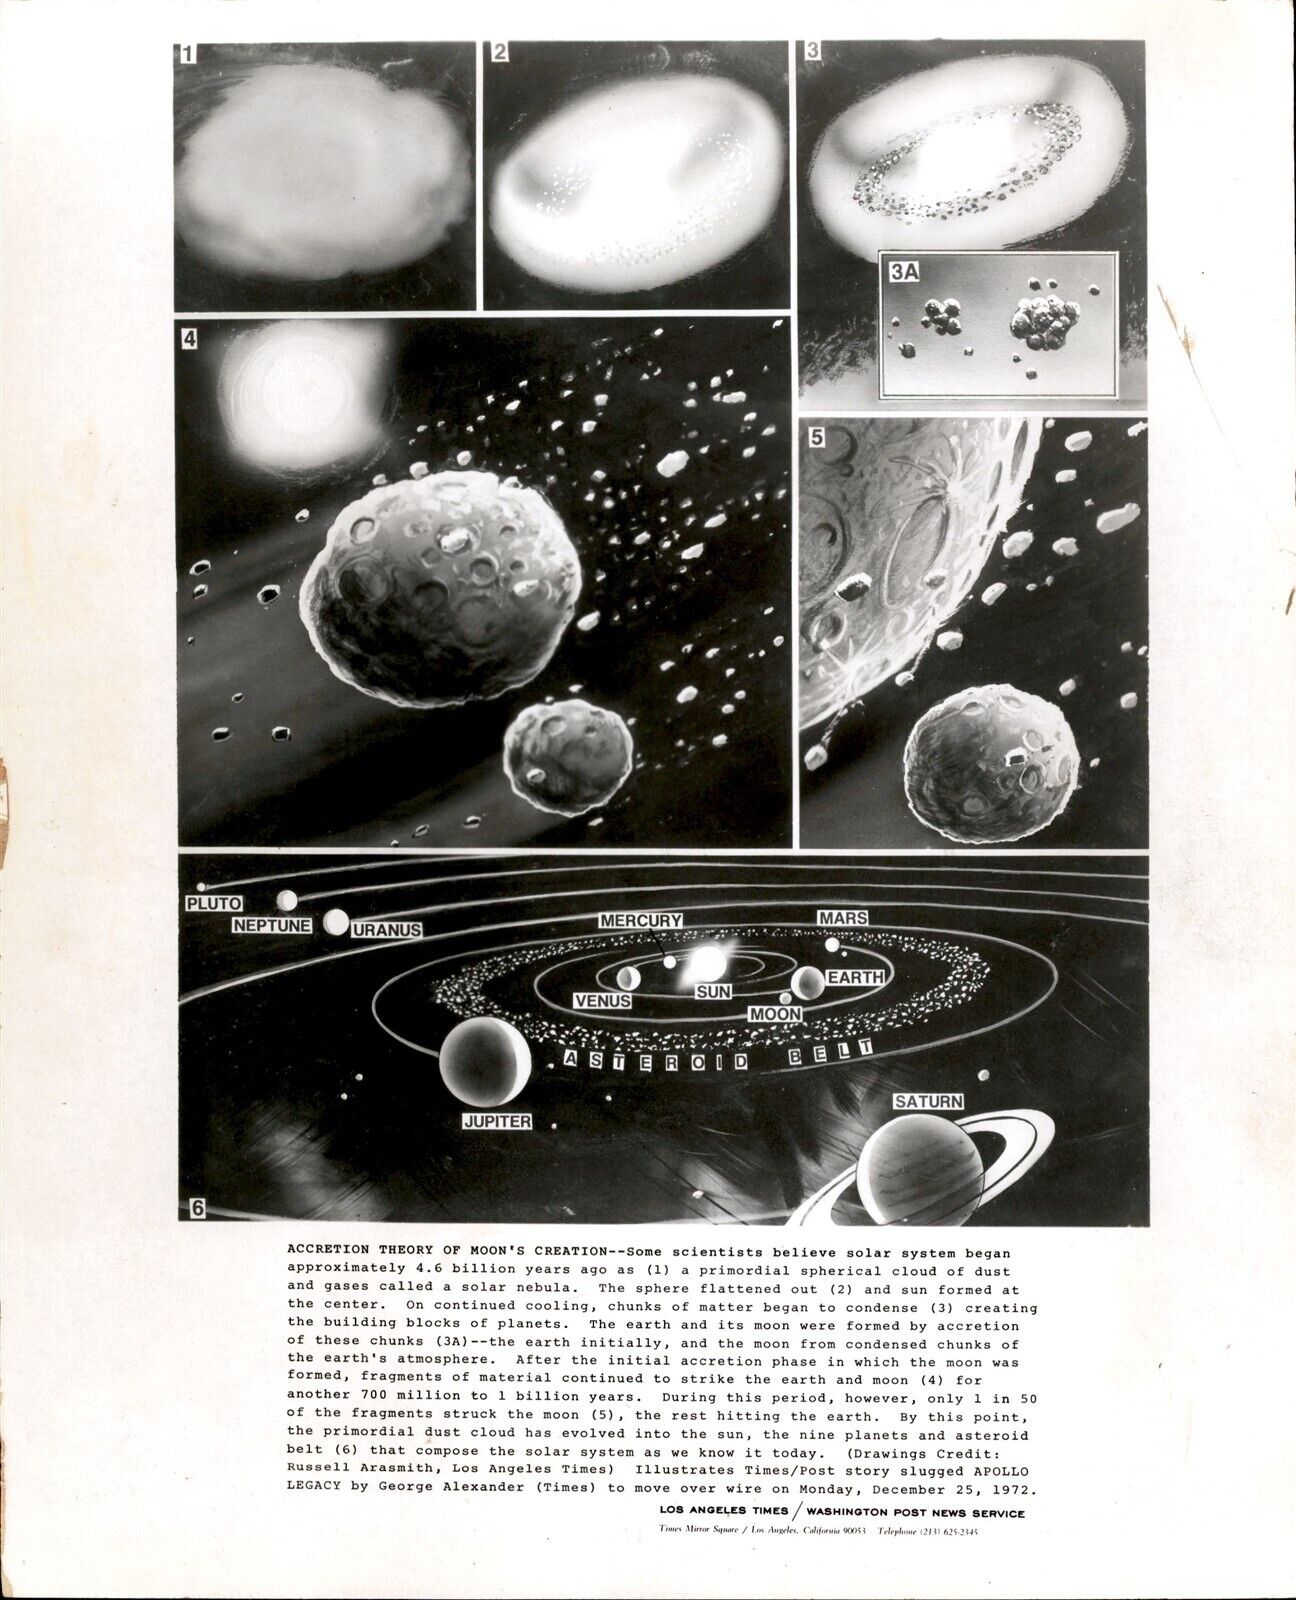 LG21 1972 Orig Photo ACCRETION THEORY OF MOON'S CREATION SOLAR SYSTEM FORMATION